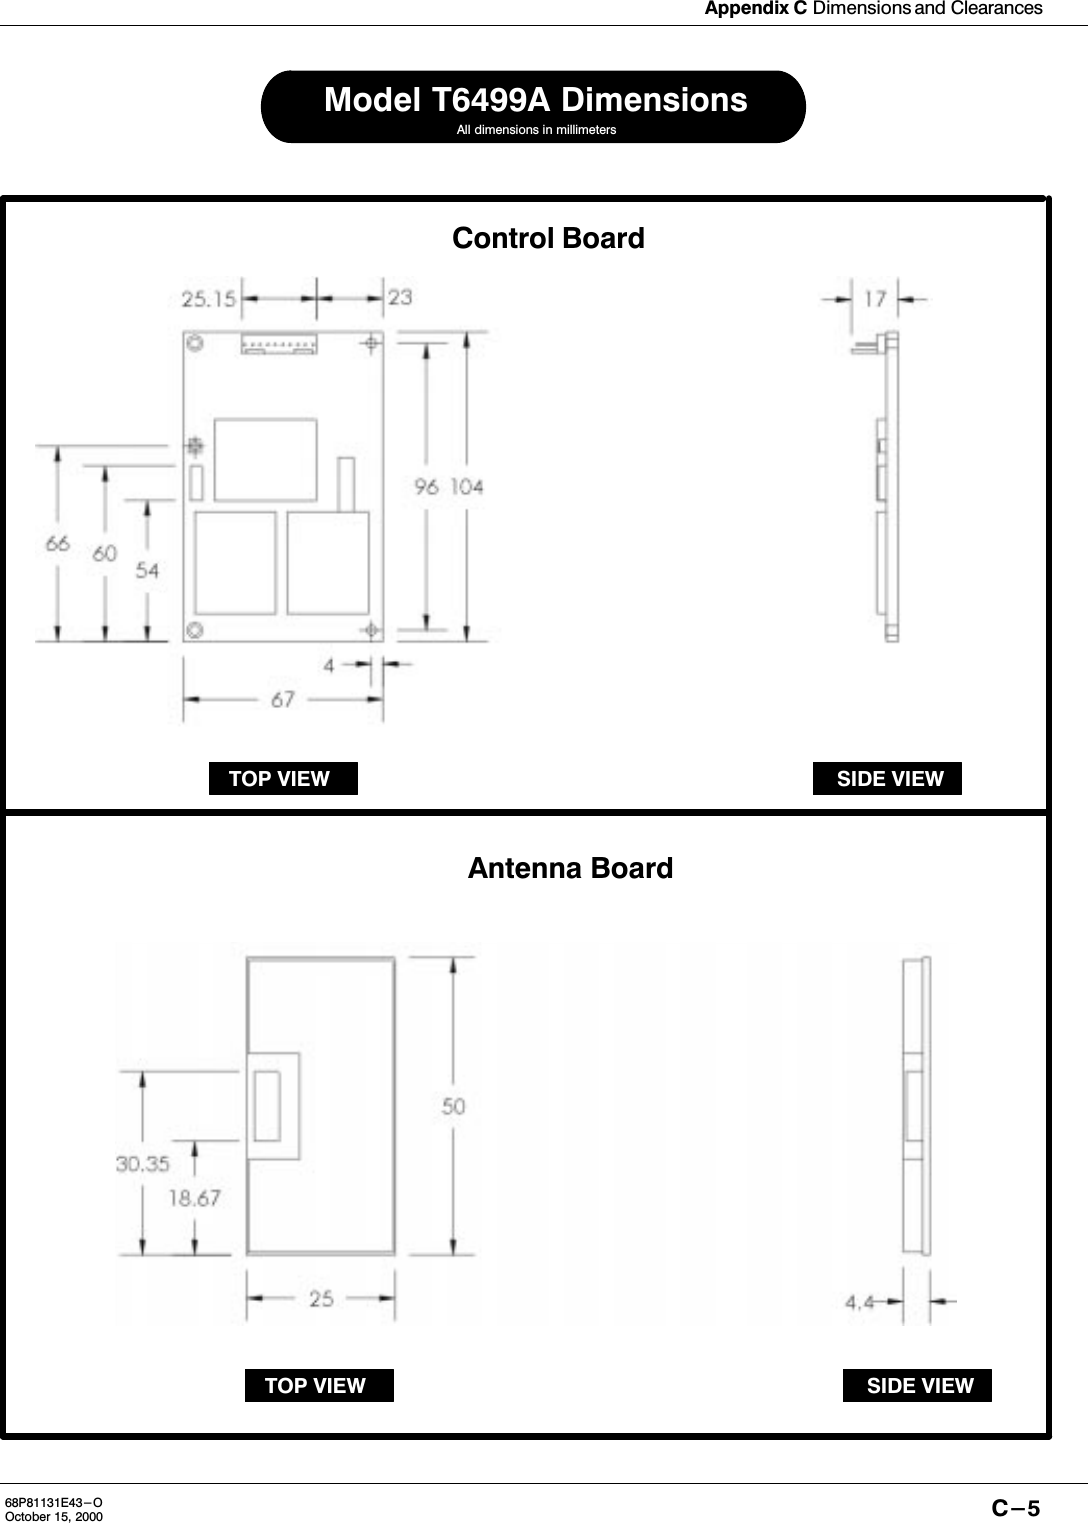 Appendix C Dimensions and ClearancesC-568P81131E43-OOctober 15, 2000Control BoardTOP VIEW SIDE VIEWAntenna BoardAll dimensions in millimetersModel T6499A DimensionsSIDE VIEWTOP VIEW